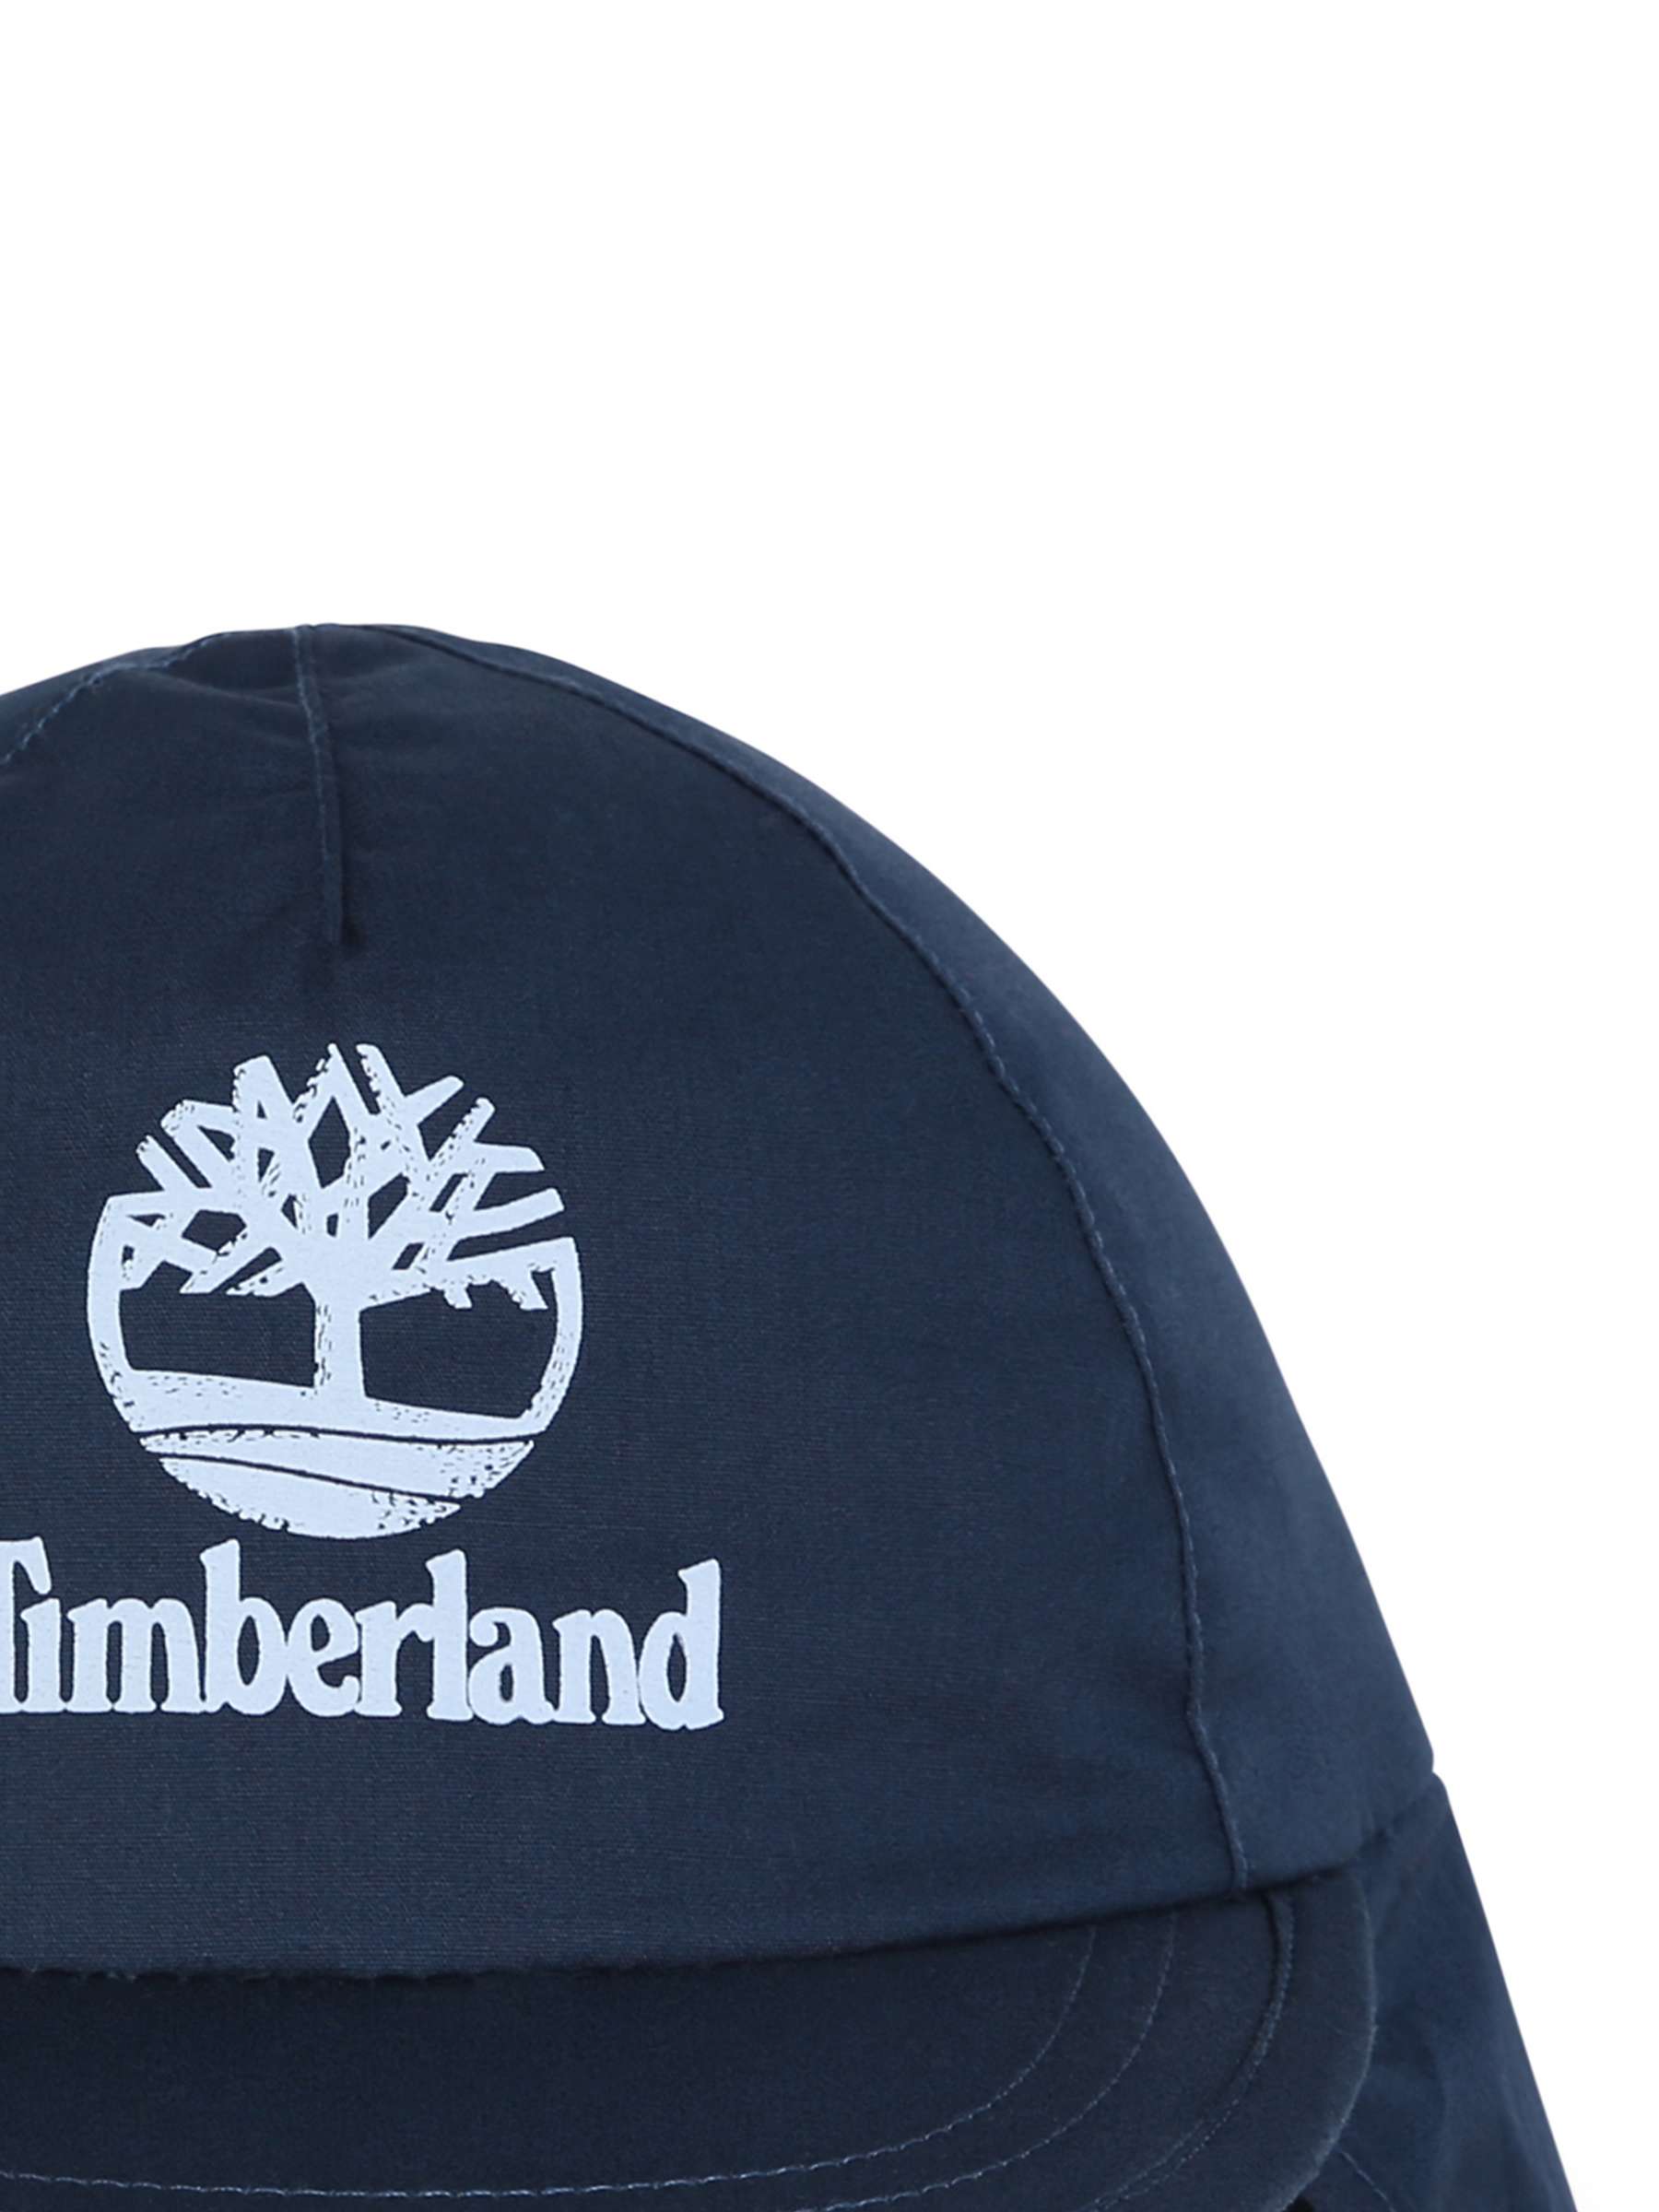 Buy Timberland Baby Logo Neck Protection Cap, Navy/Multi Online at johnlewis.com